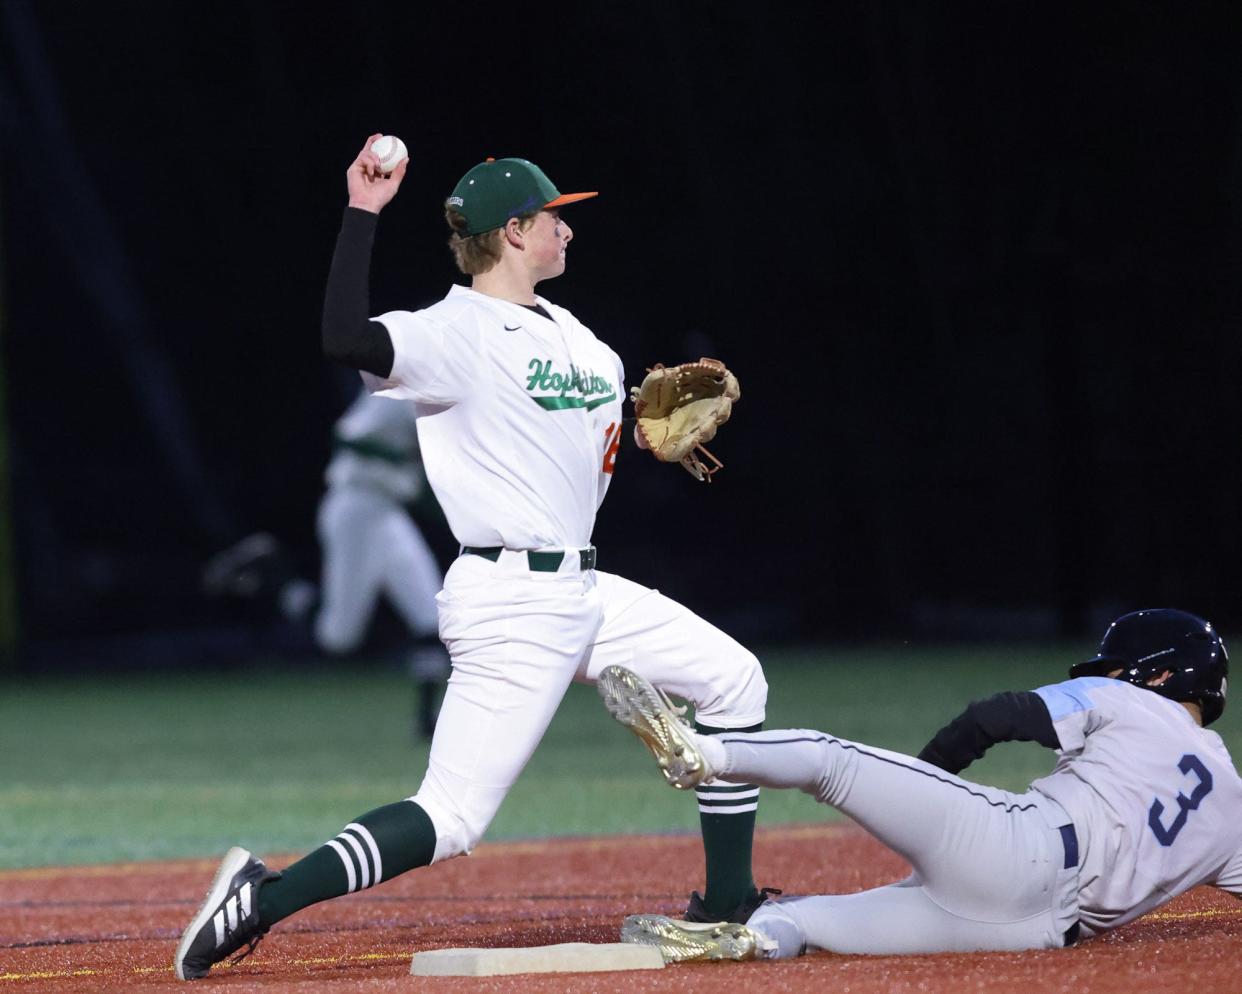 Hopkinton’s Derek Hatherley makes the play at second base during the Hillers' baseball game against Medfield at Hopkinton High School on April 4, 2023.